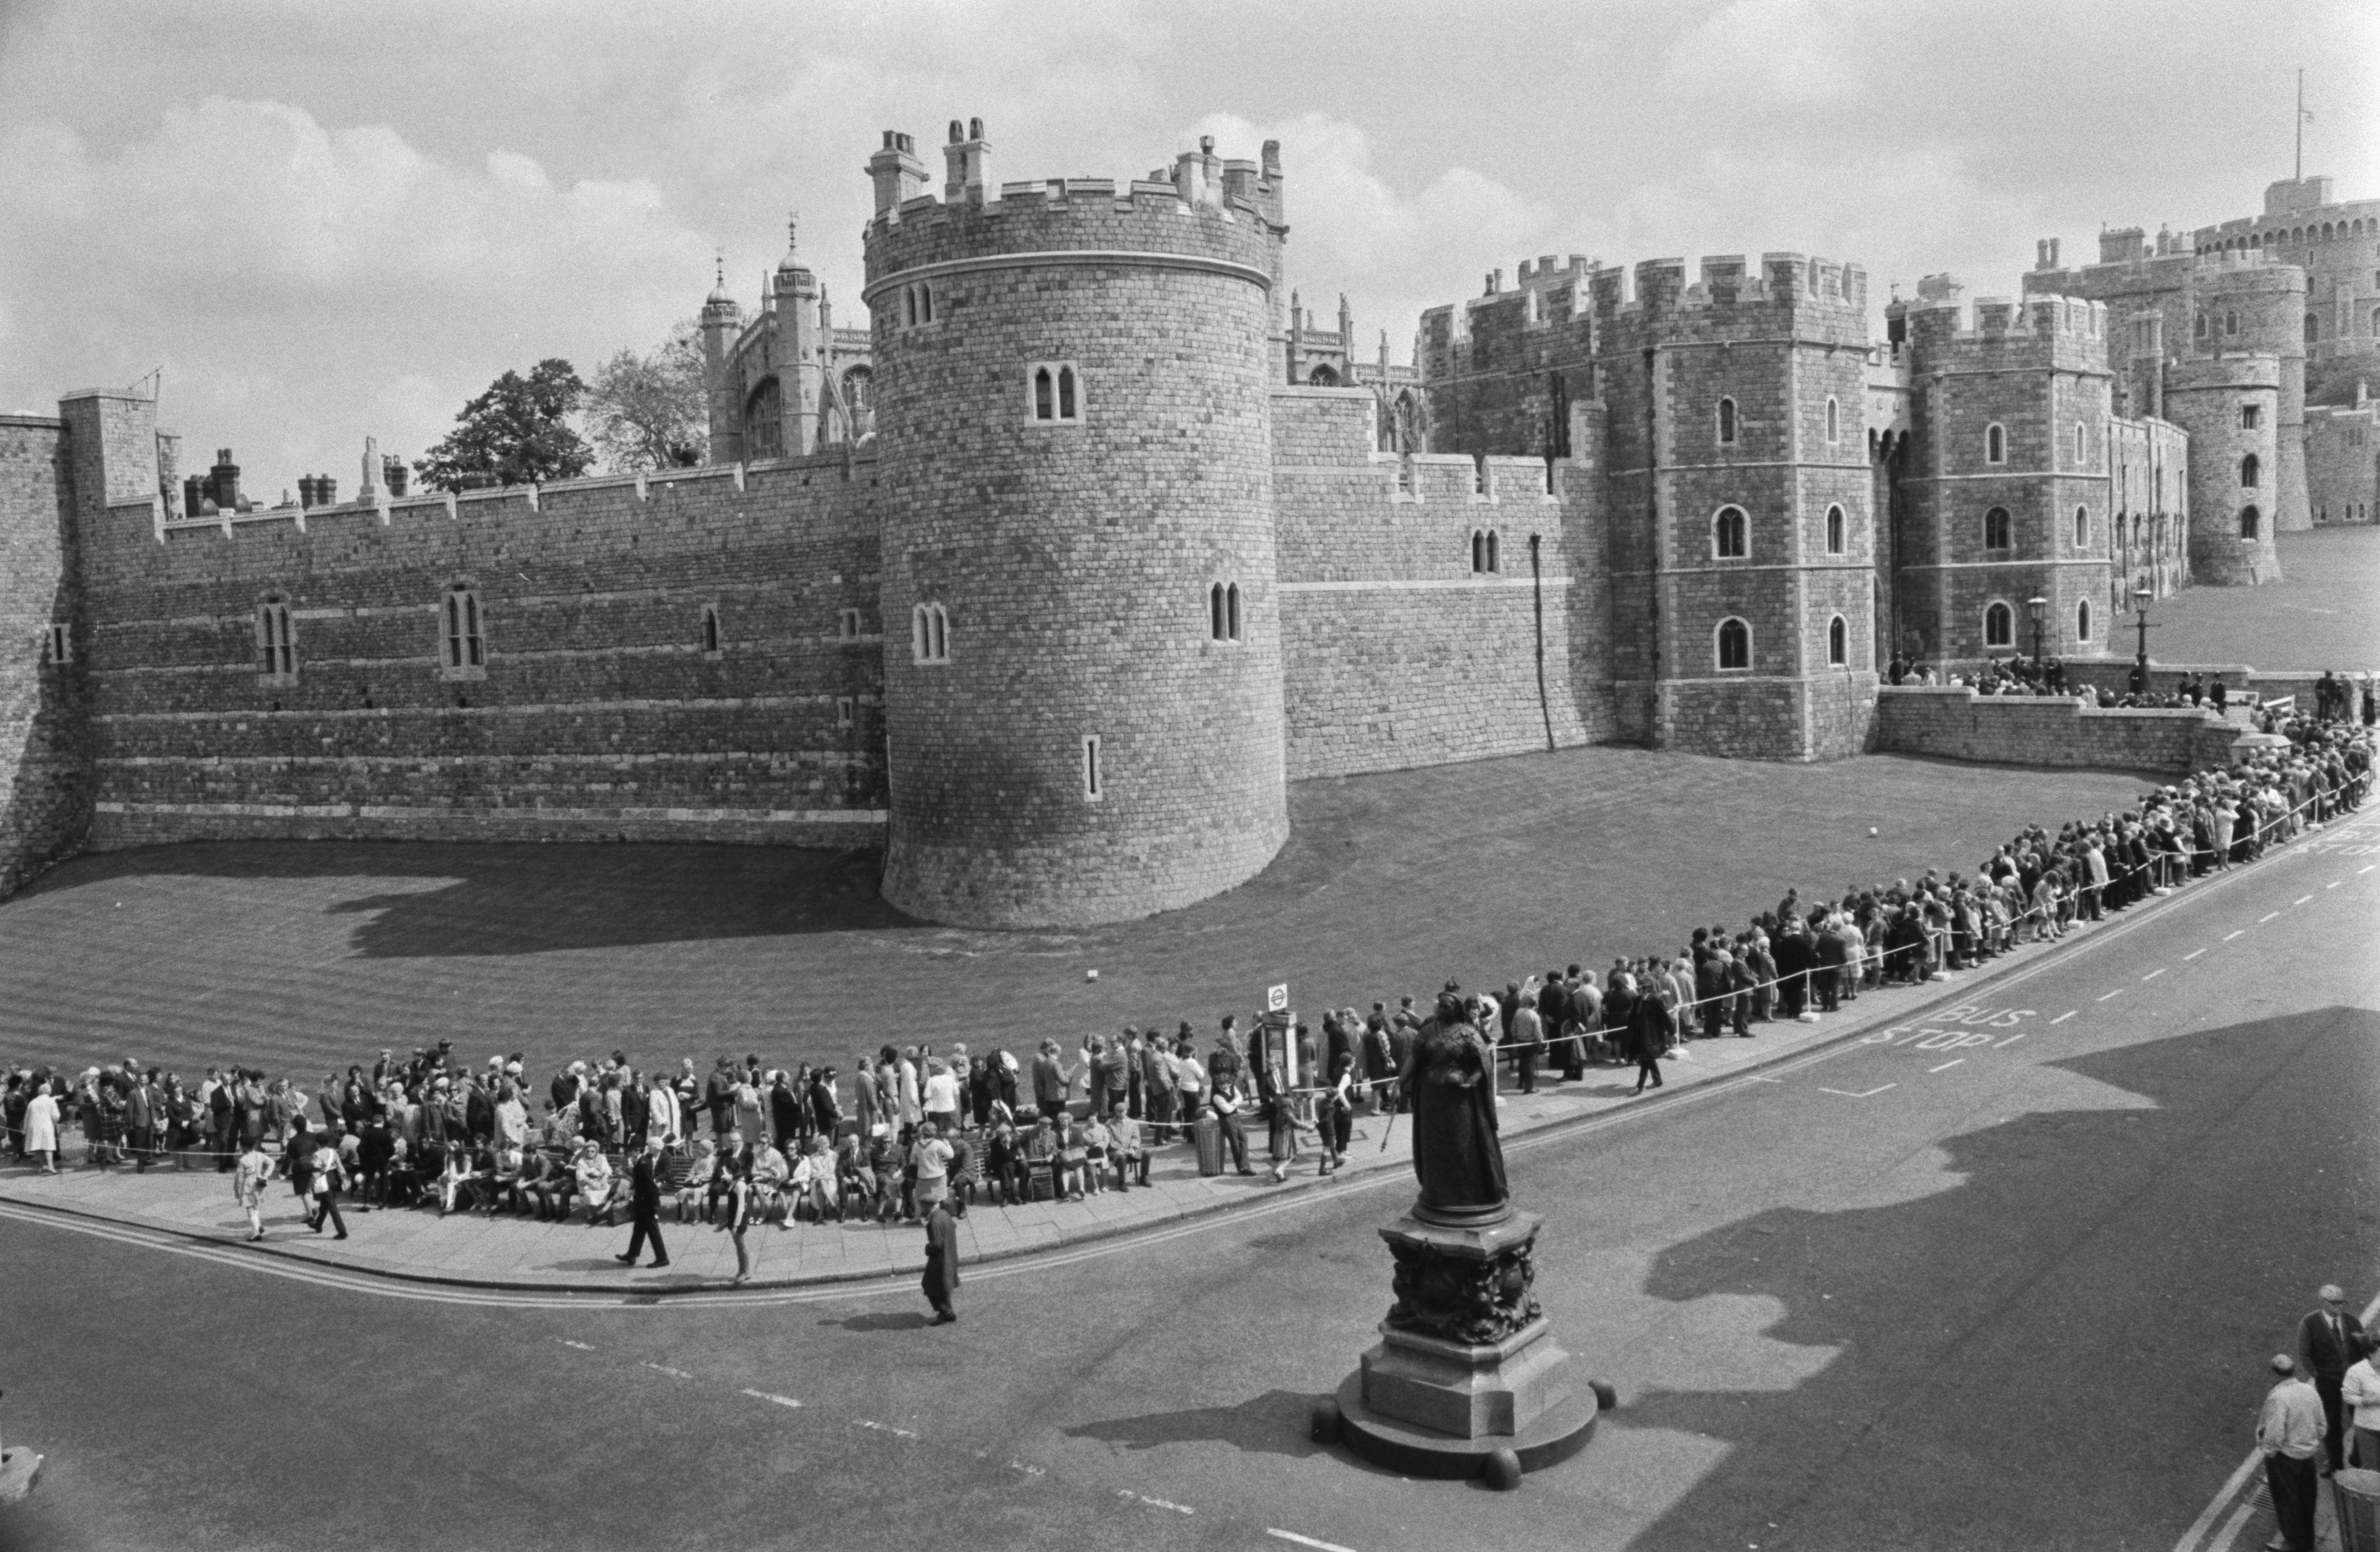 <p>The public lined up outside Windsor Castle in Windsor, England, during the lying-in-state of the Duke of Windsor, formerly King Edward VIII, in June 1972 ahead of his funeral on June 5.</p>